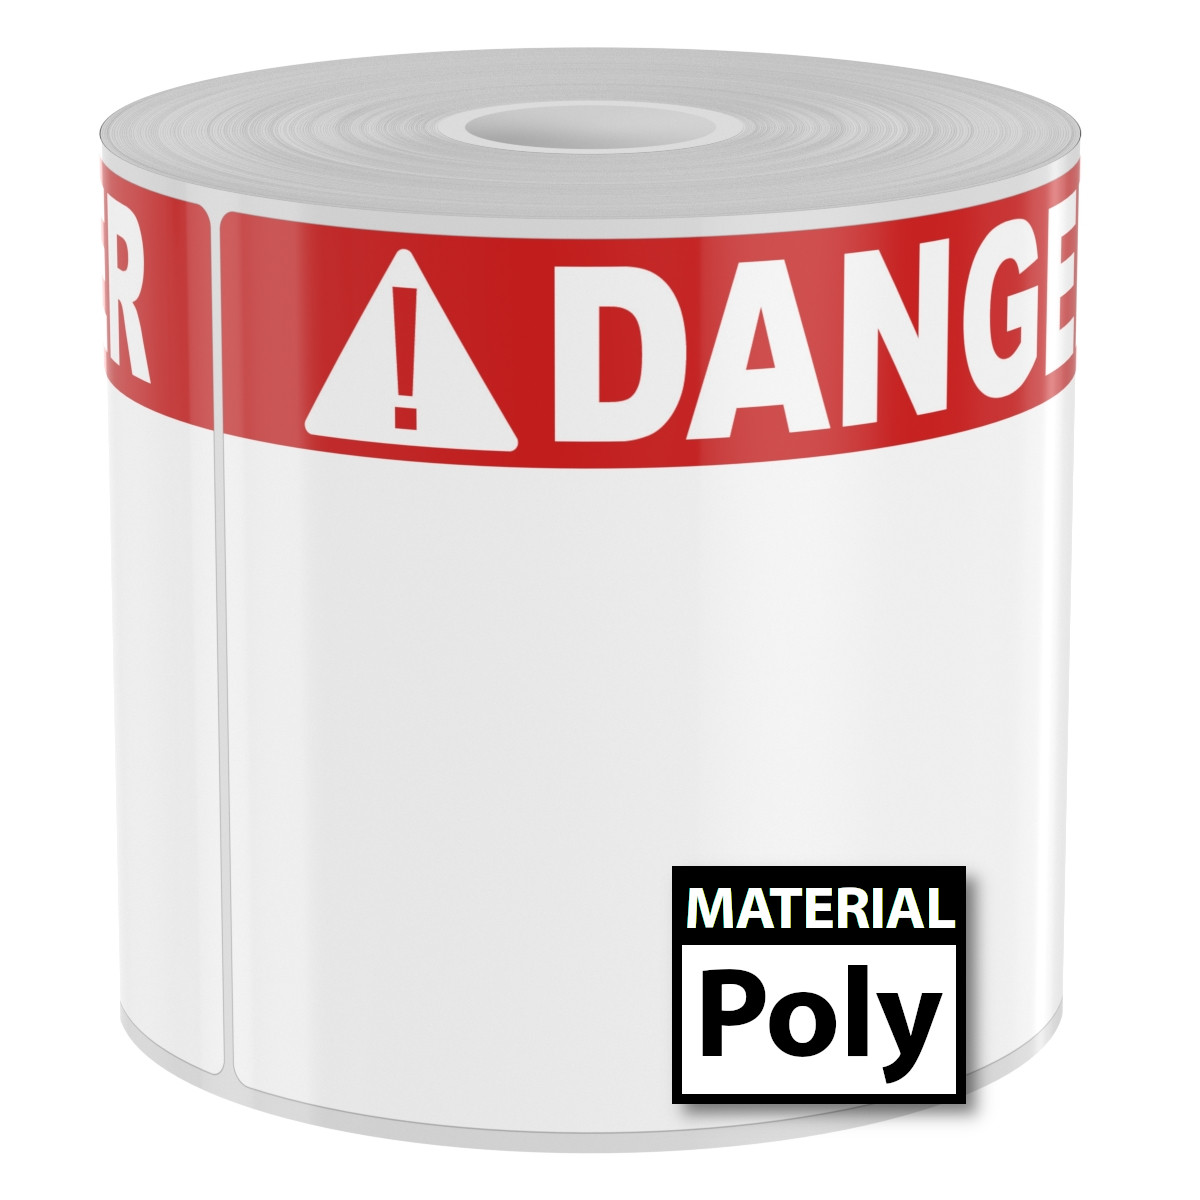 Detail view for 250 4" x 6" High-Performance Poly Arc Flash labels White Danger on Red Band